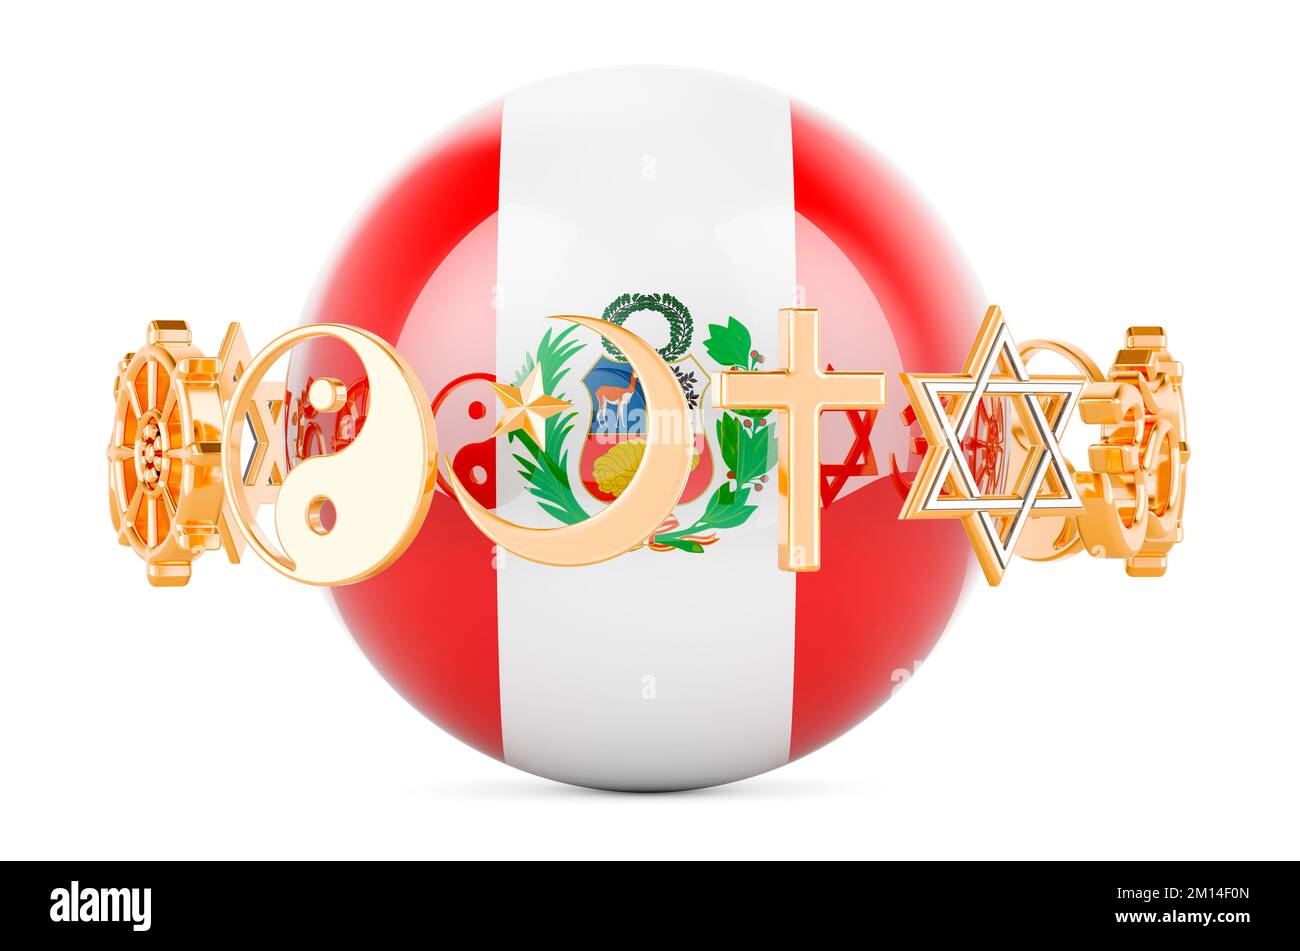 Peruvian flag painted on sphere with religions symbols around, 3D rendering isolated on white background Stock Photo